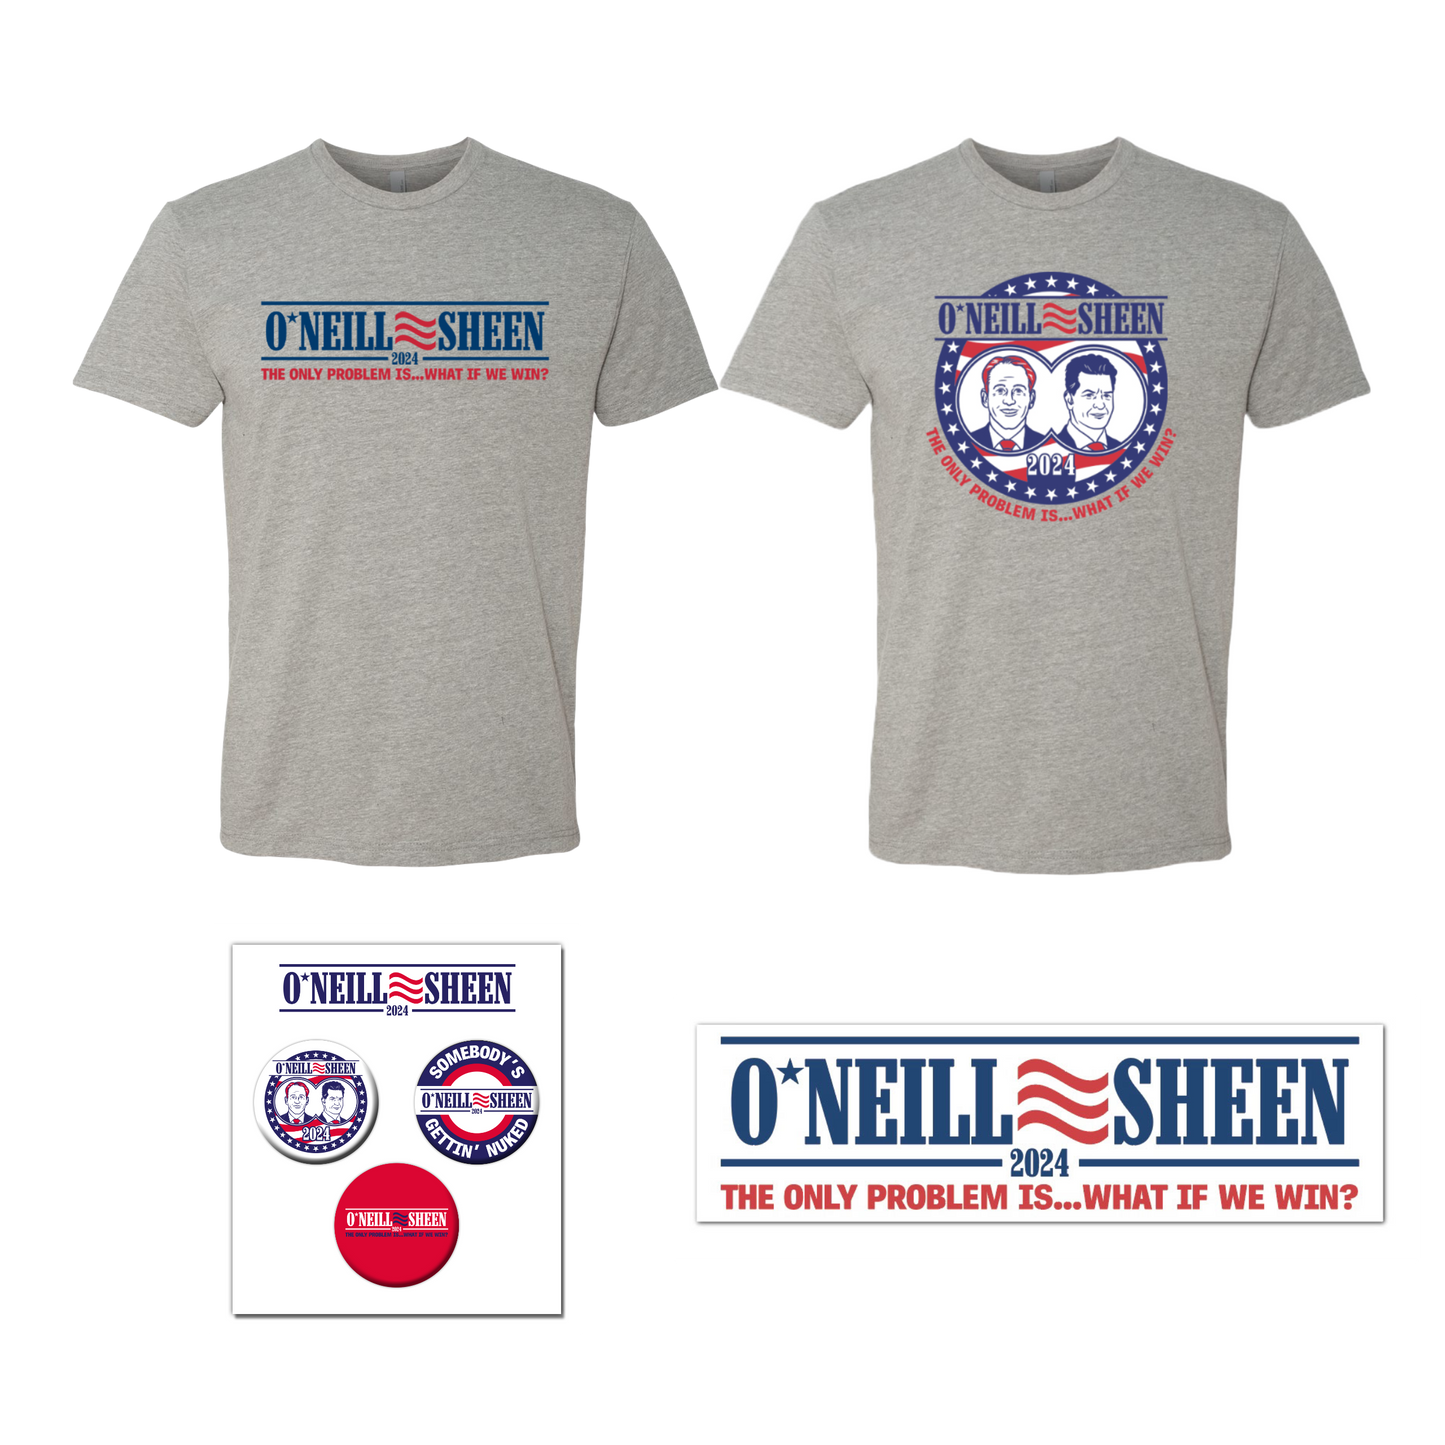 O'Neill / Sheen campaign bundle with 2 tees, button pack, and bumper sticker RJO